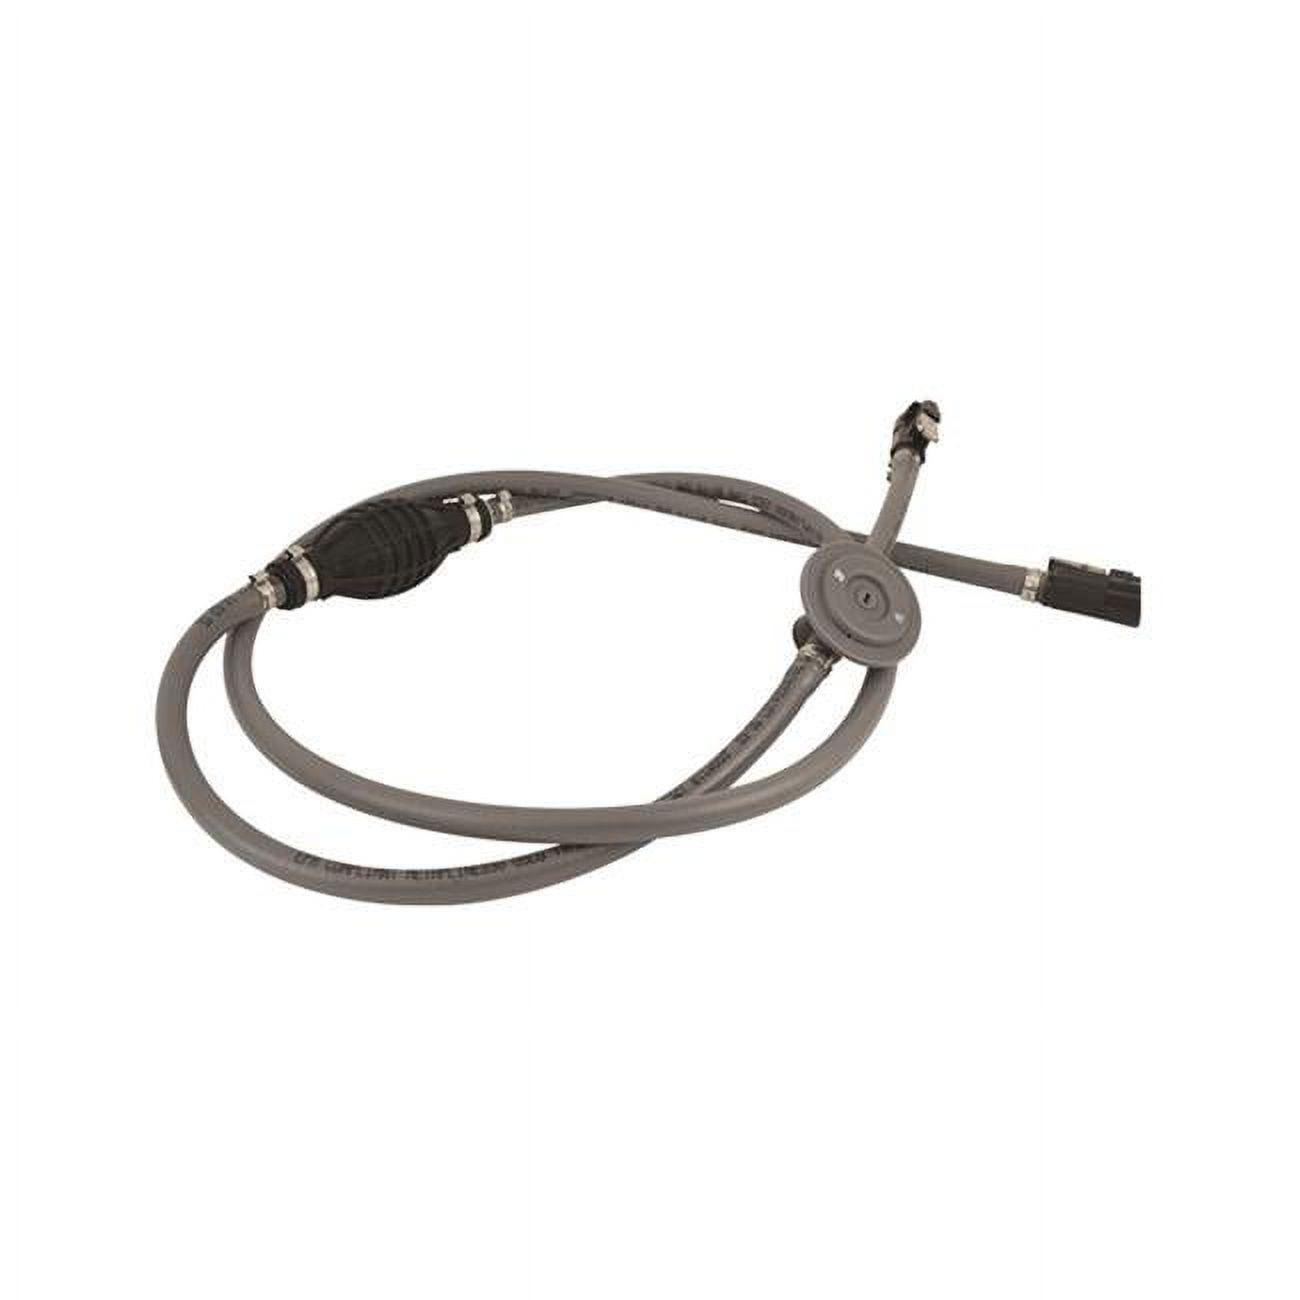 Attwood Universal Fuel Line Hose Kit with Fuel Demand Valve and